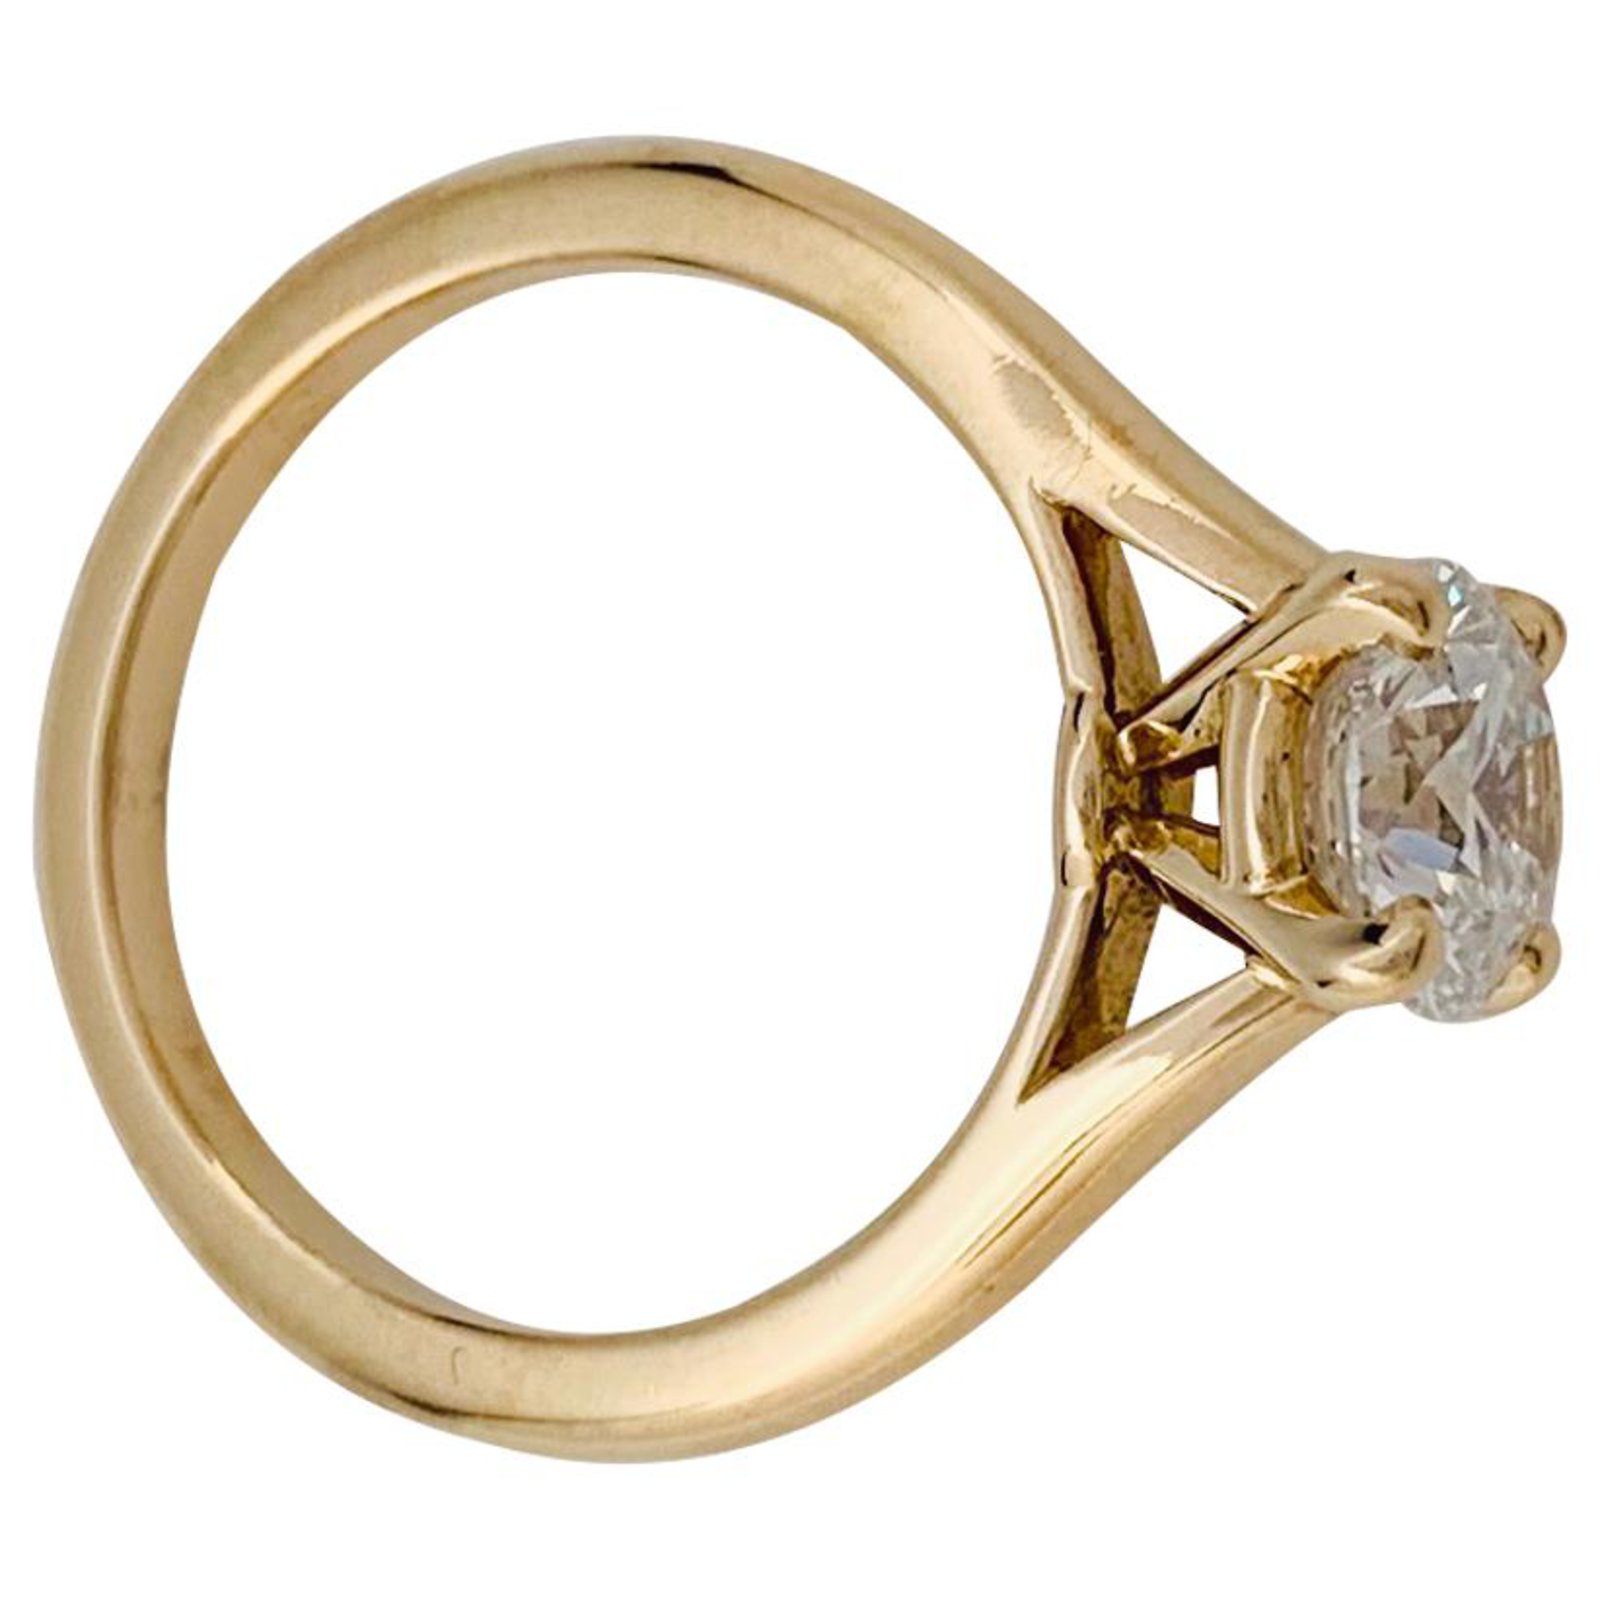 Cartier solitaire ring "1895" in yellow, diamond 0,95 carat. Yellow